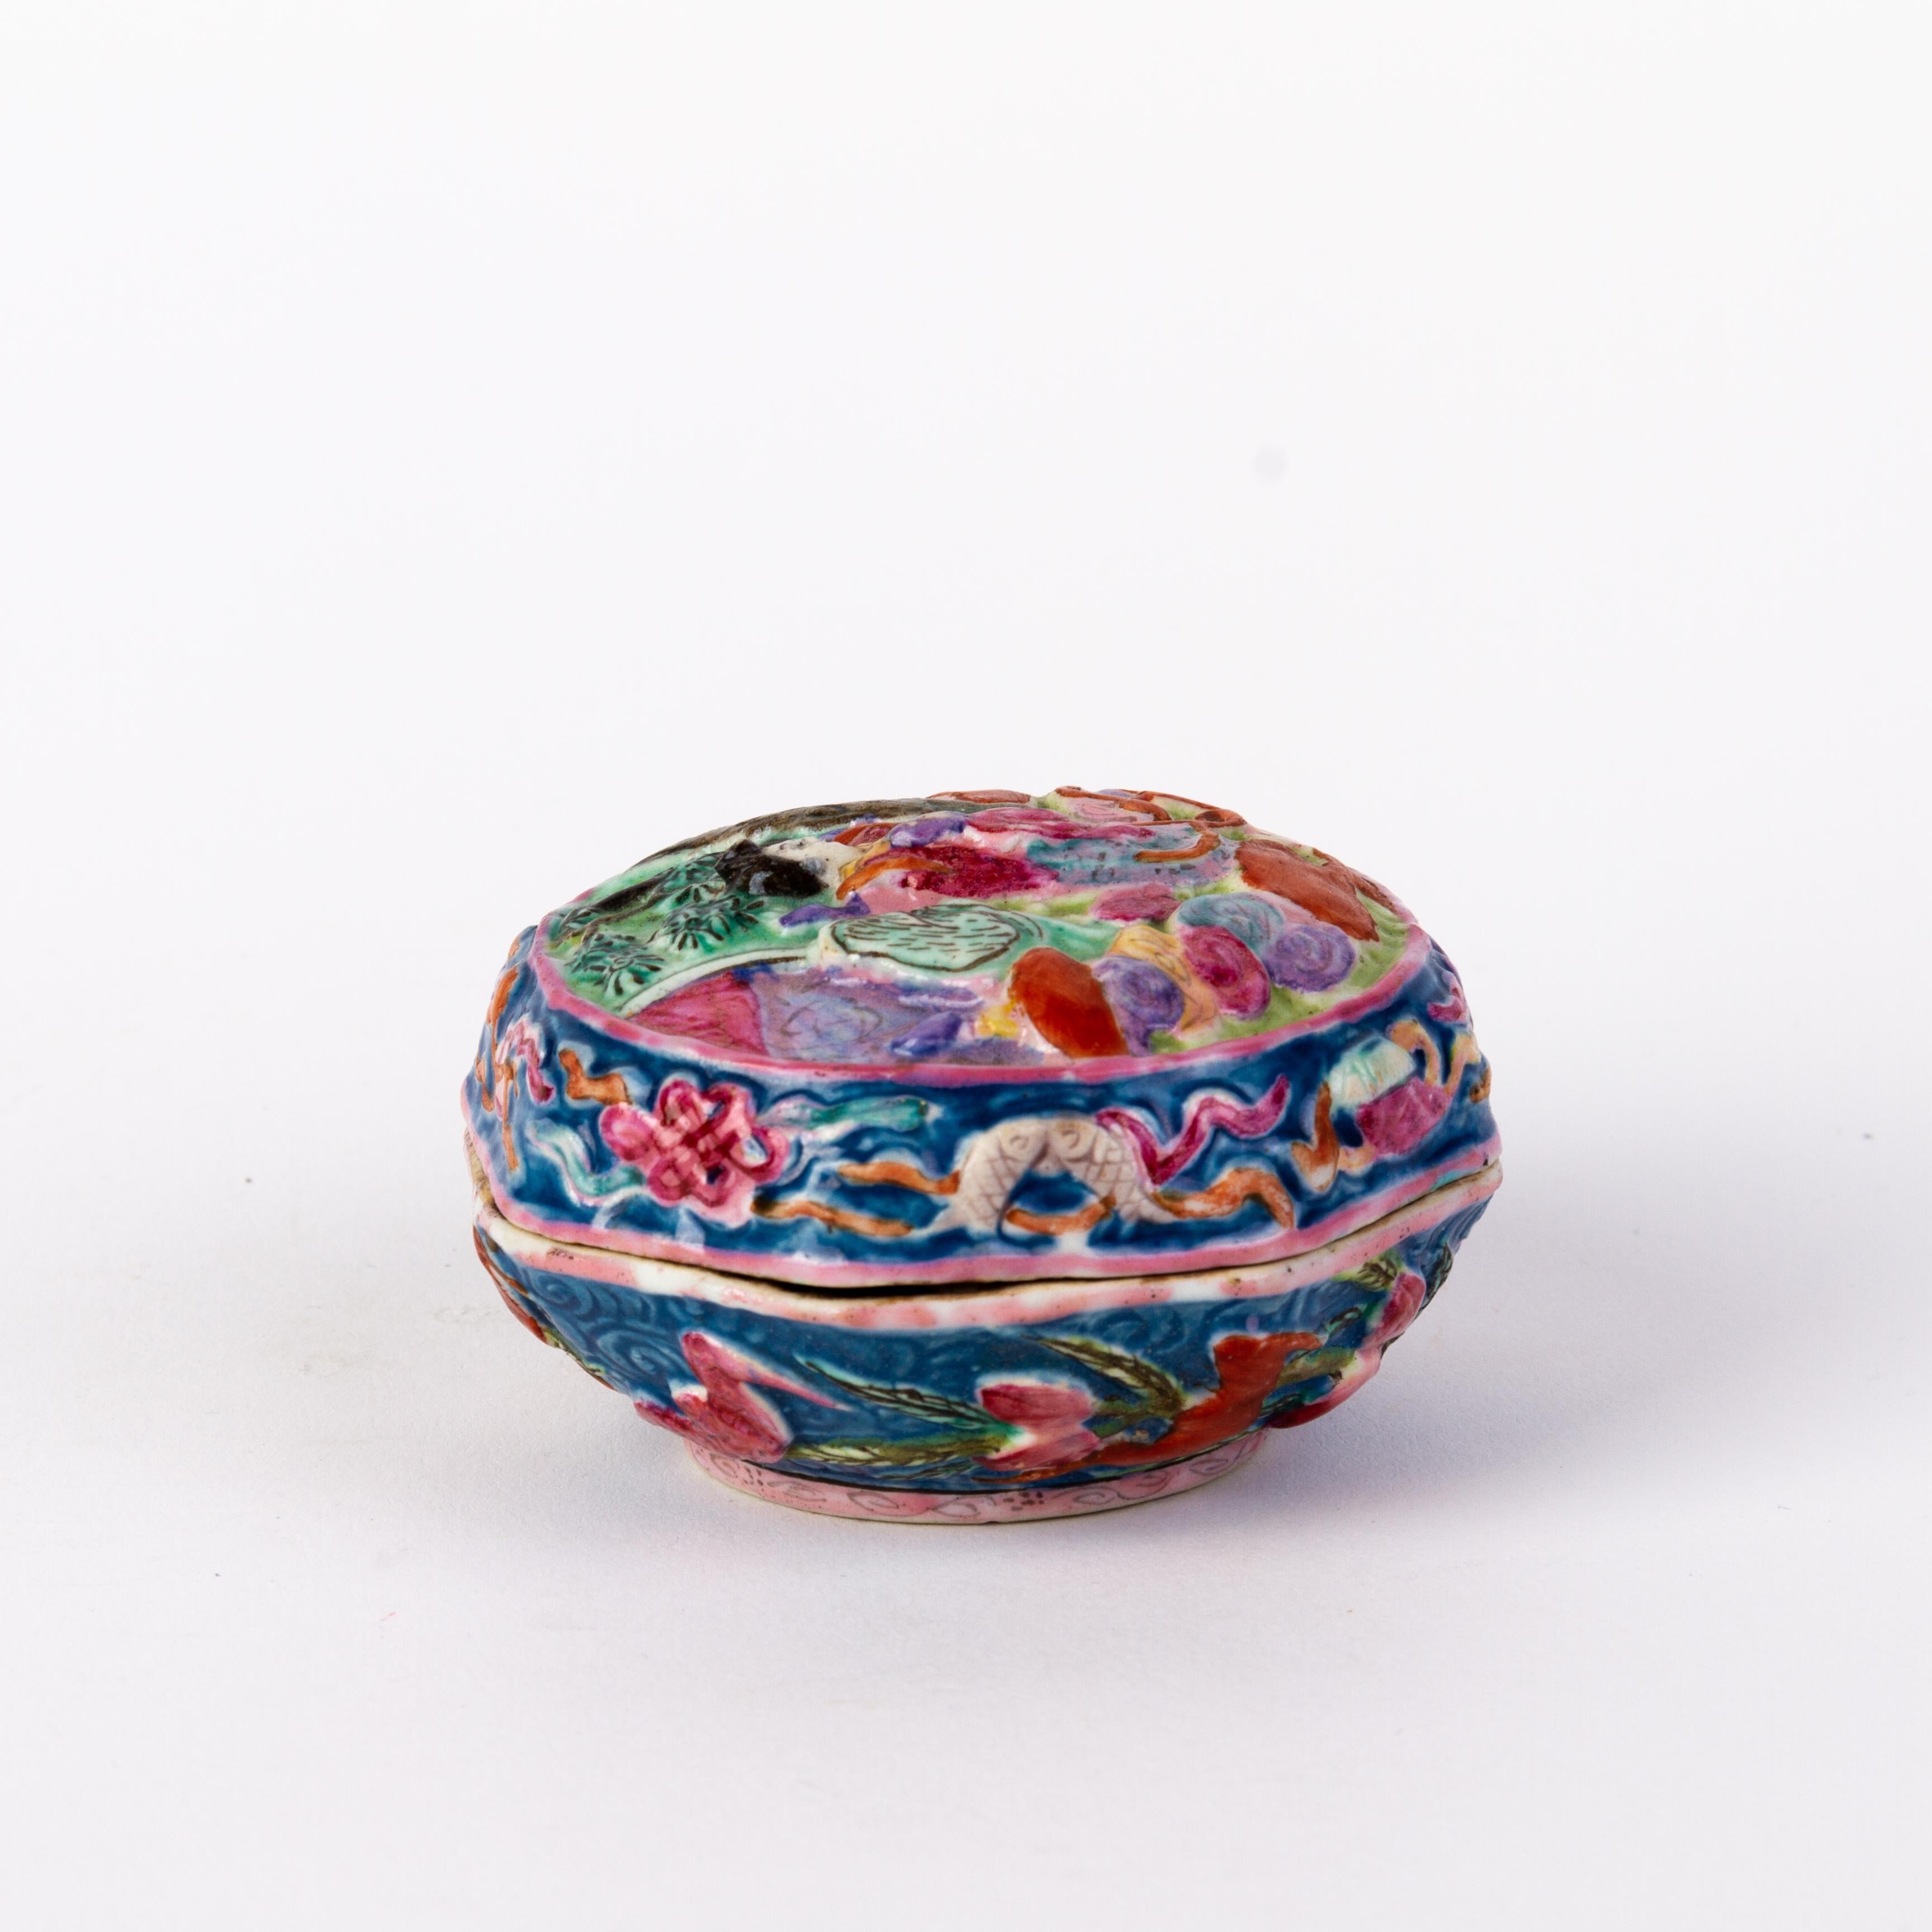 Chinese Qianlong Seal Mark Famille Rose Lidded Paste Box 18th Century 
Good condition overall
From a private collection.
Free international shipping.